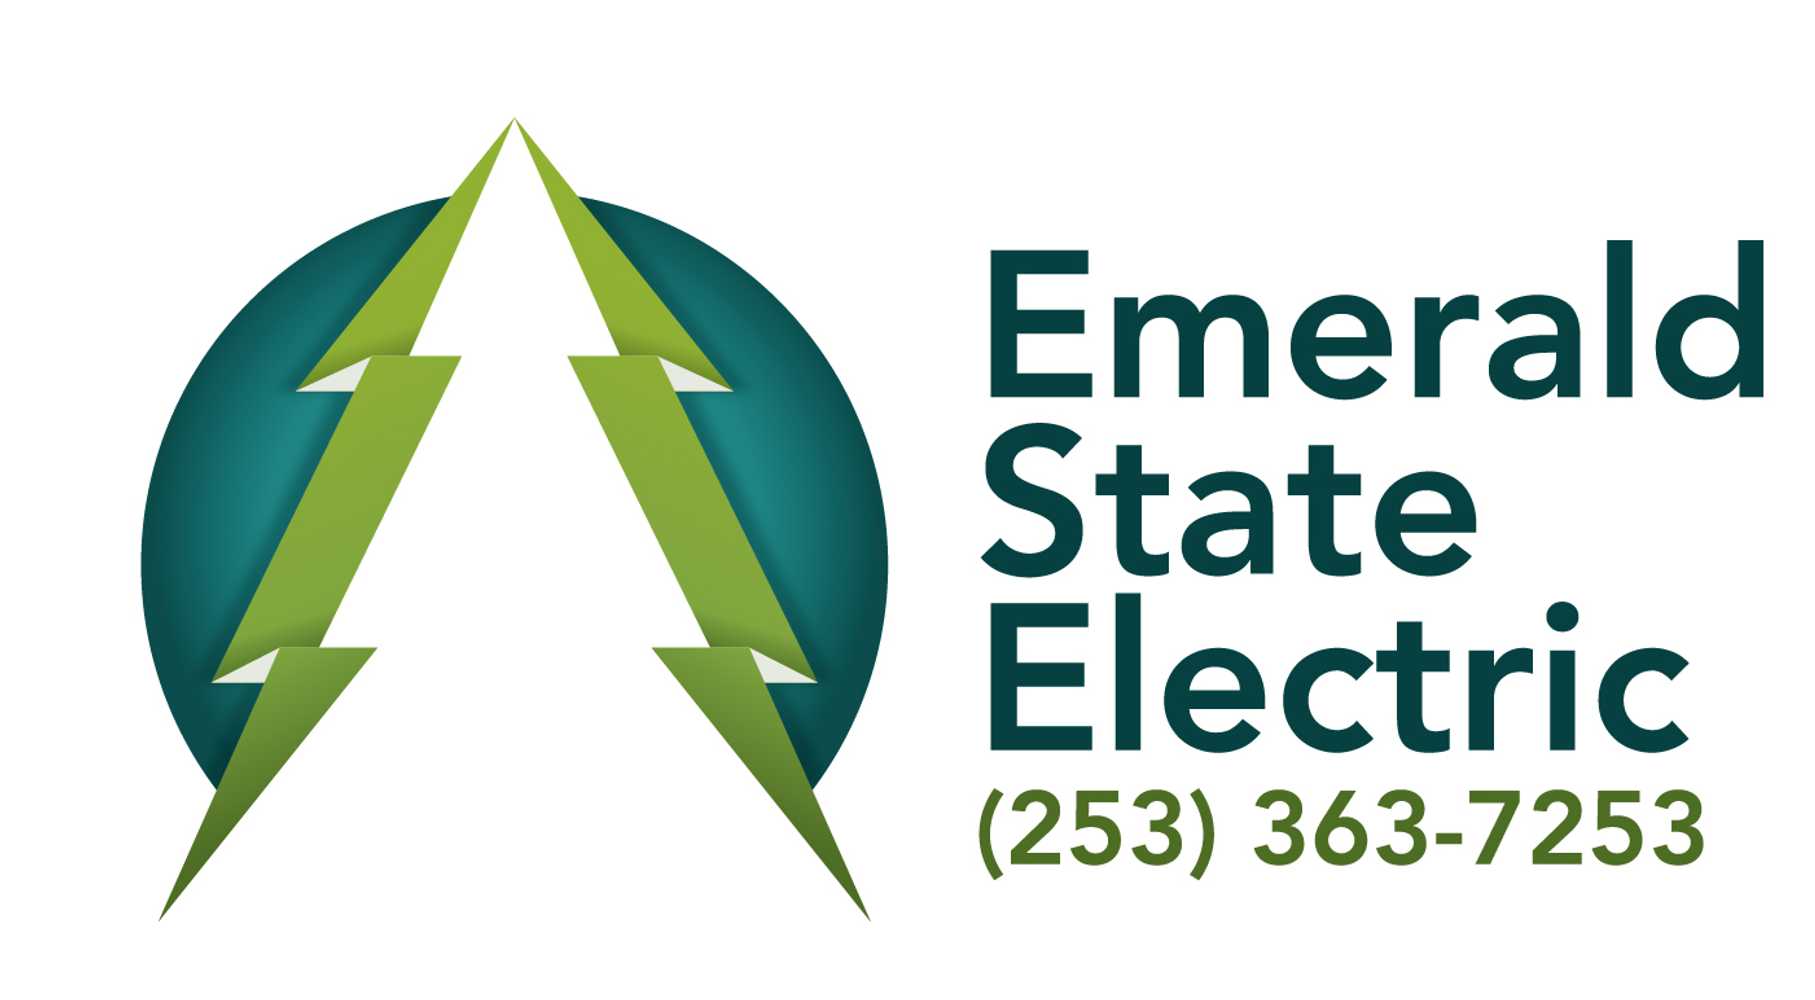 Projects by Emerald State Electric